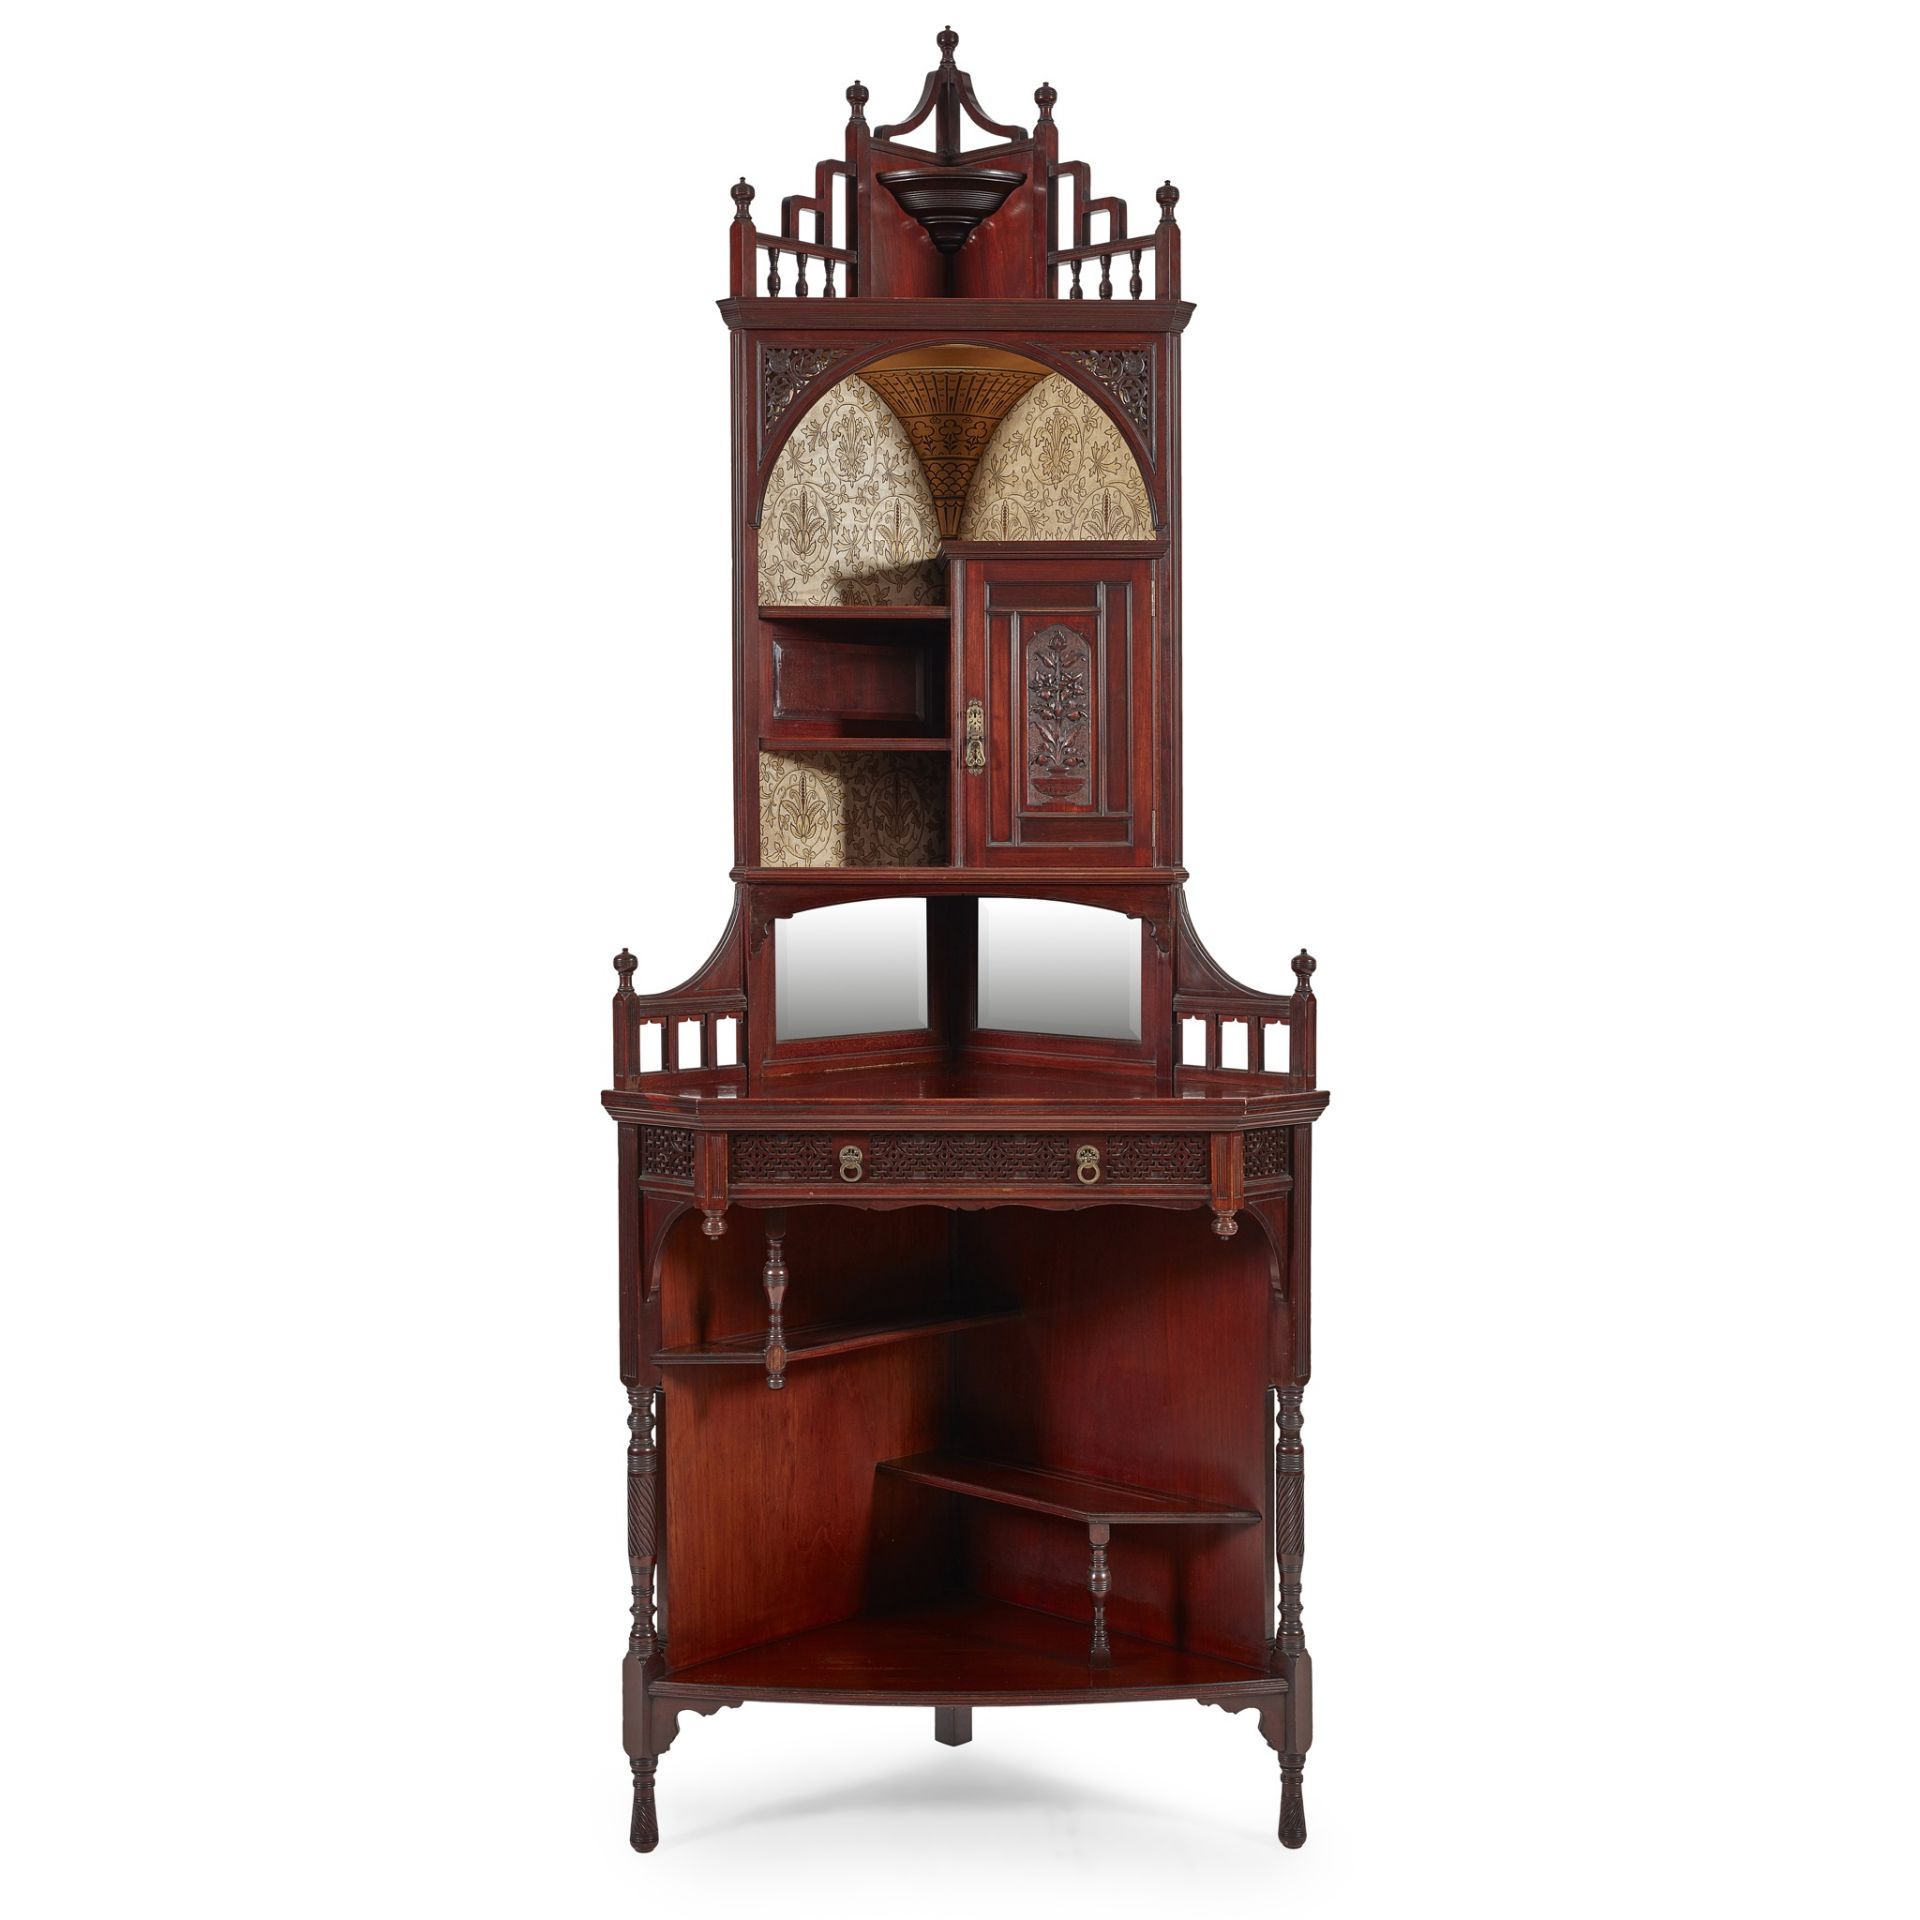 H. W. BATLEY (1846-1932) FOR GILLOW & CO., LANCASTER AESTHETIC MOVEMENT MAHOGANY CORNER CABINET,